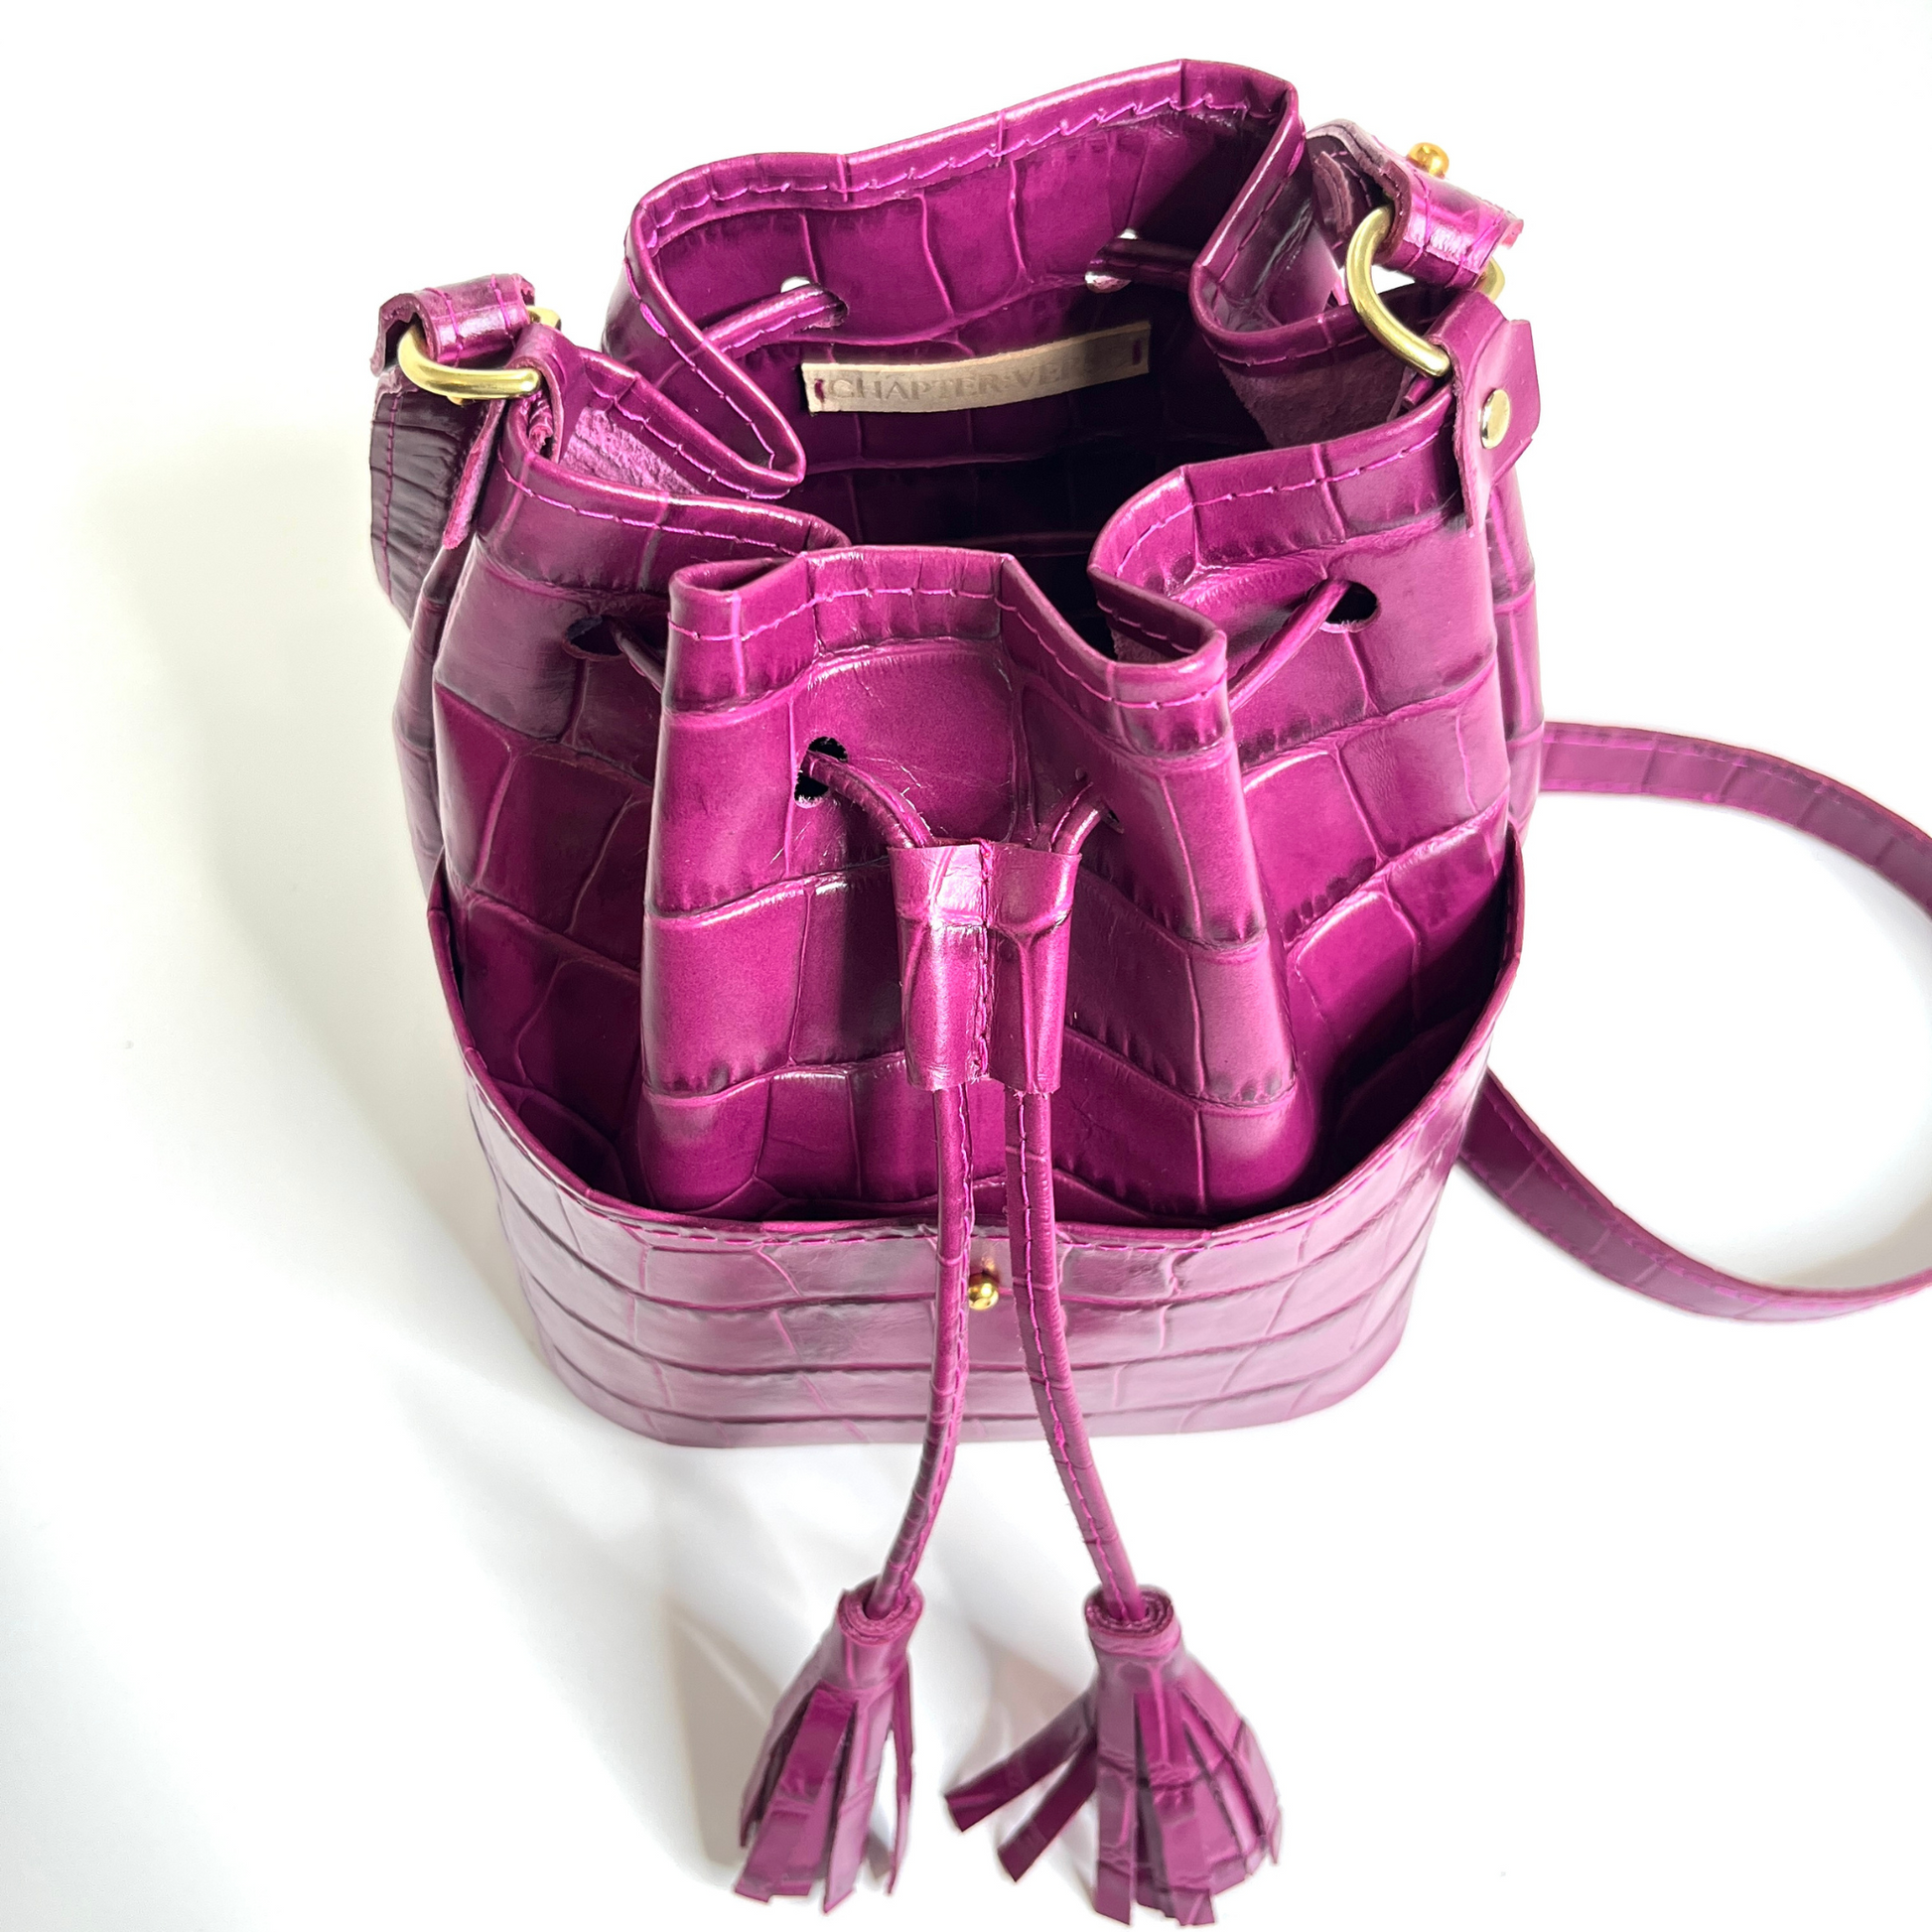 Displaying top portion of bucket bag with the drawstring taute